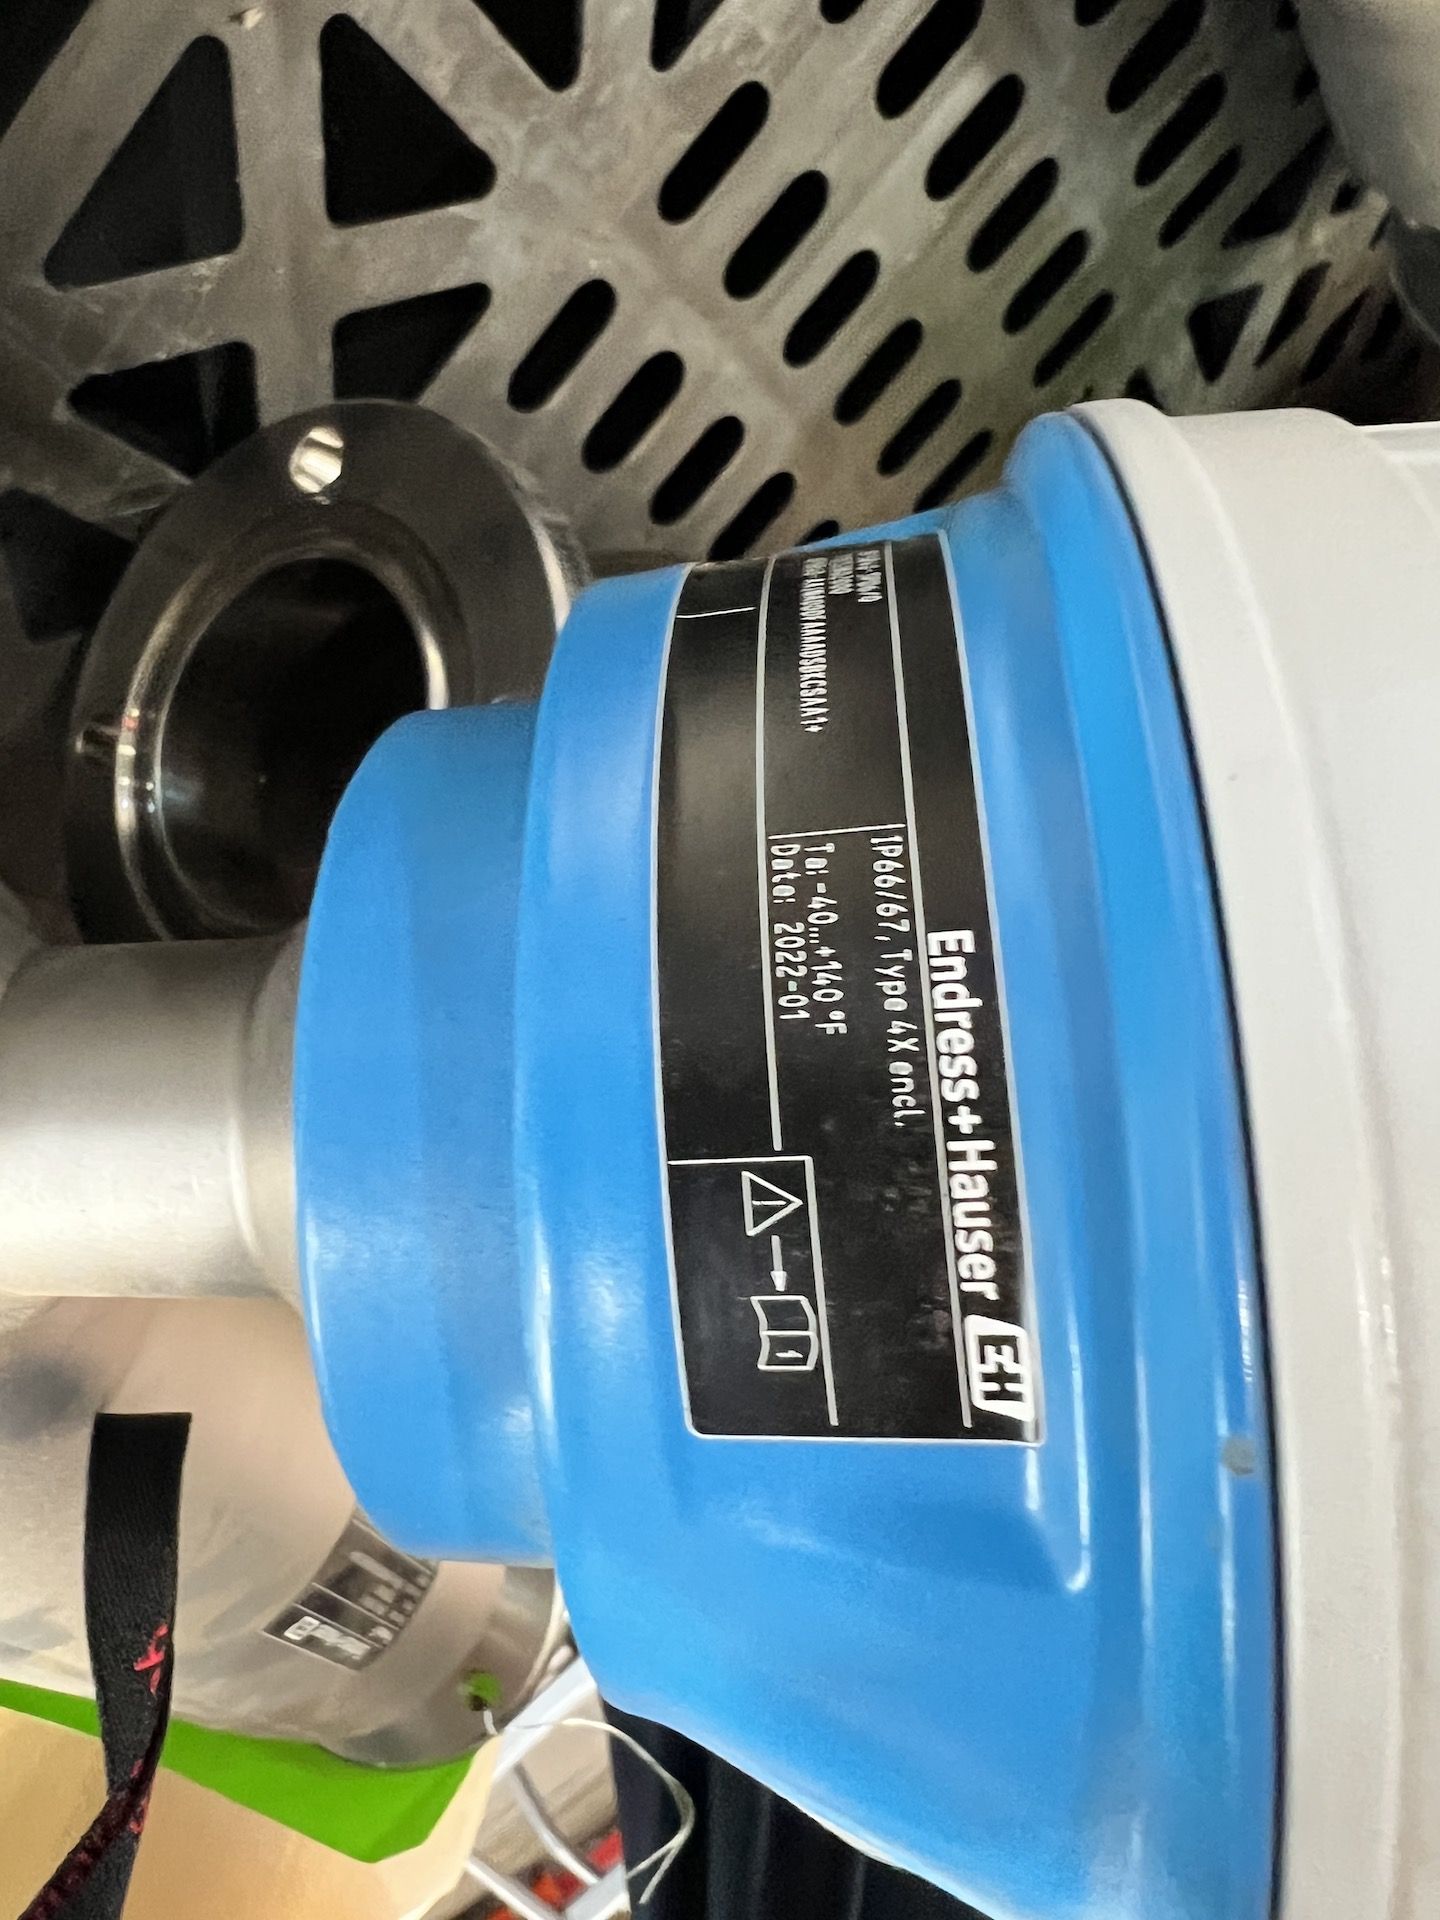 NEW ENDRESS HAUSER FLOW METER, MODEL PROMASS F - Image 6 of 8